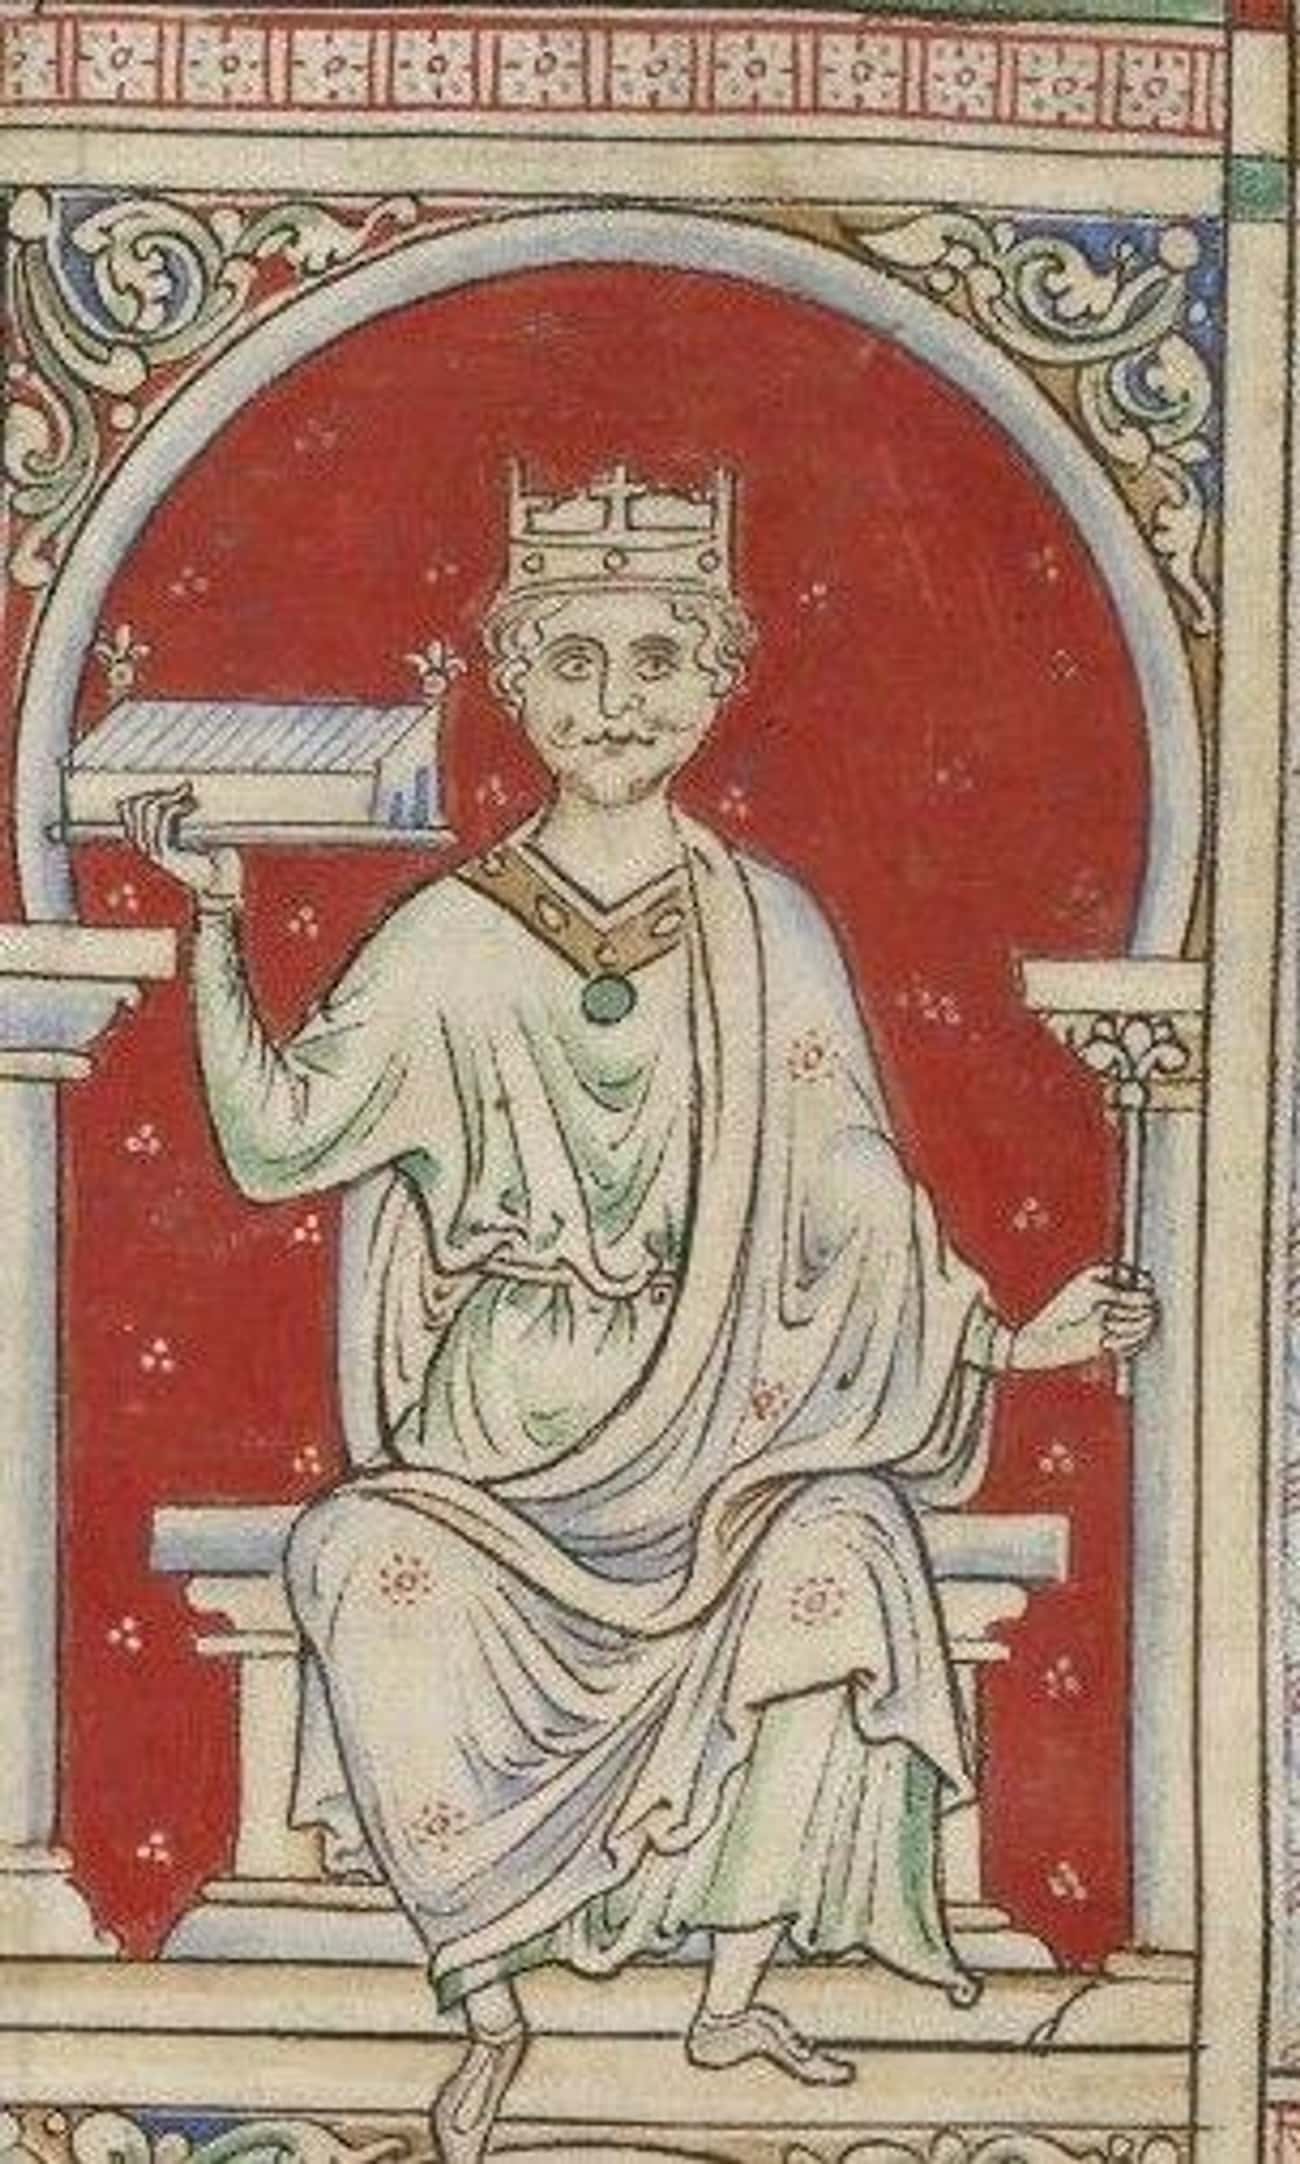 William The Conqueror Named His Spare Heir To The Throne Even Though His First Son Was Still Alive